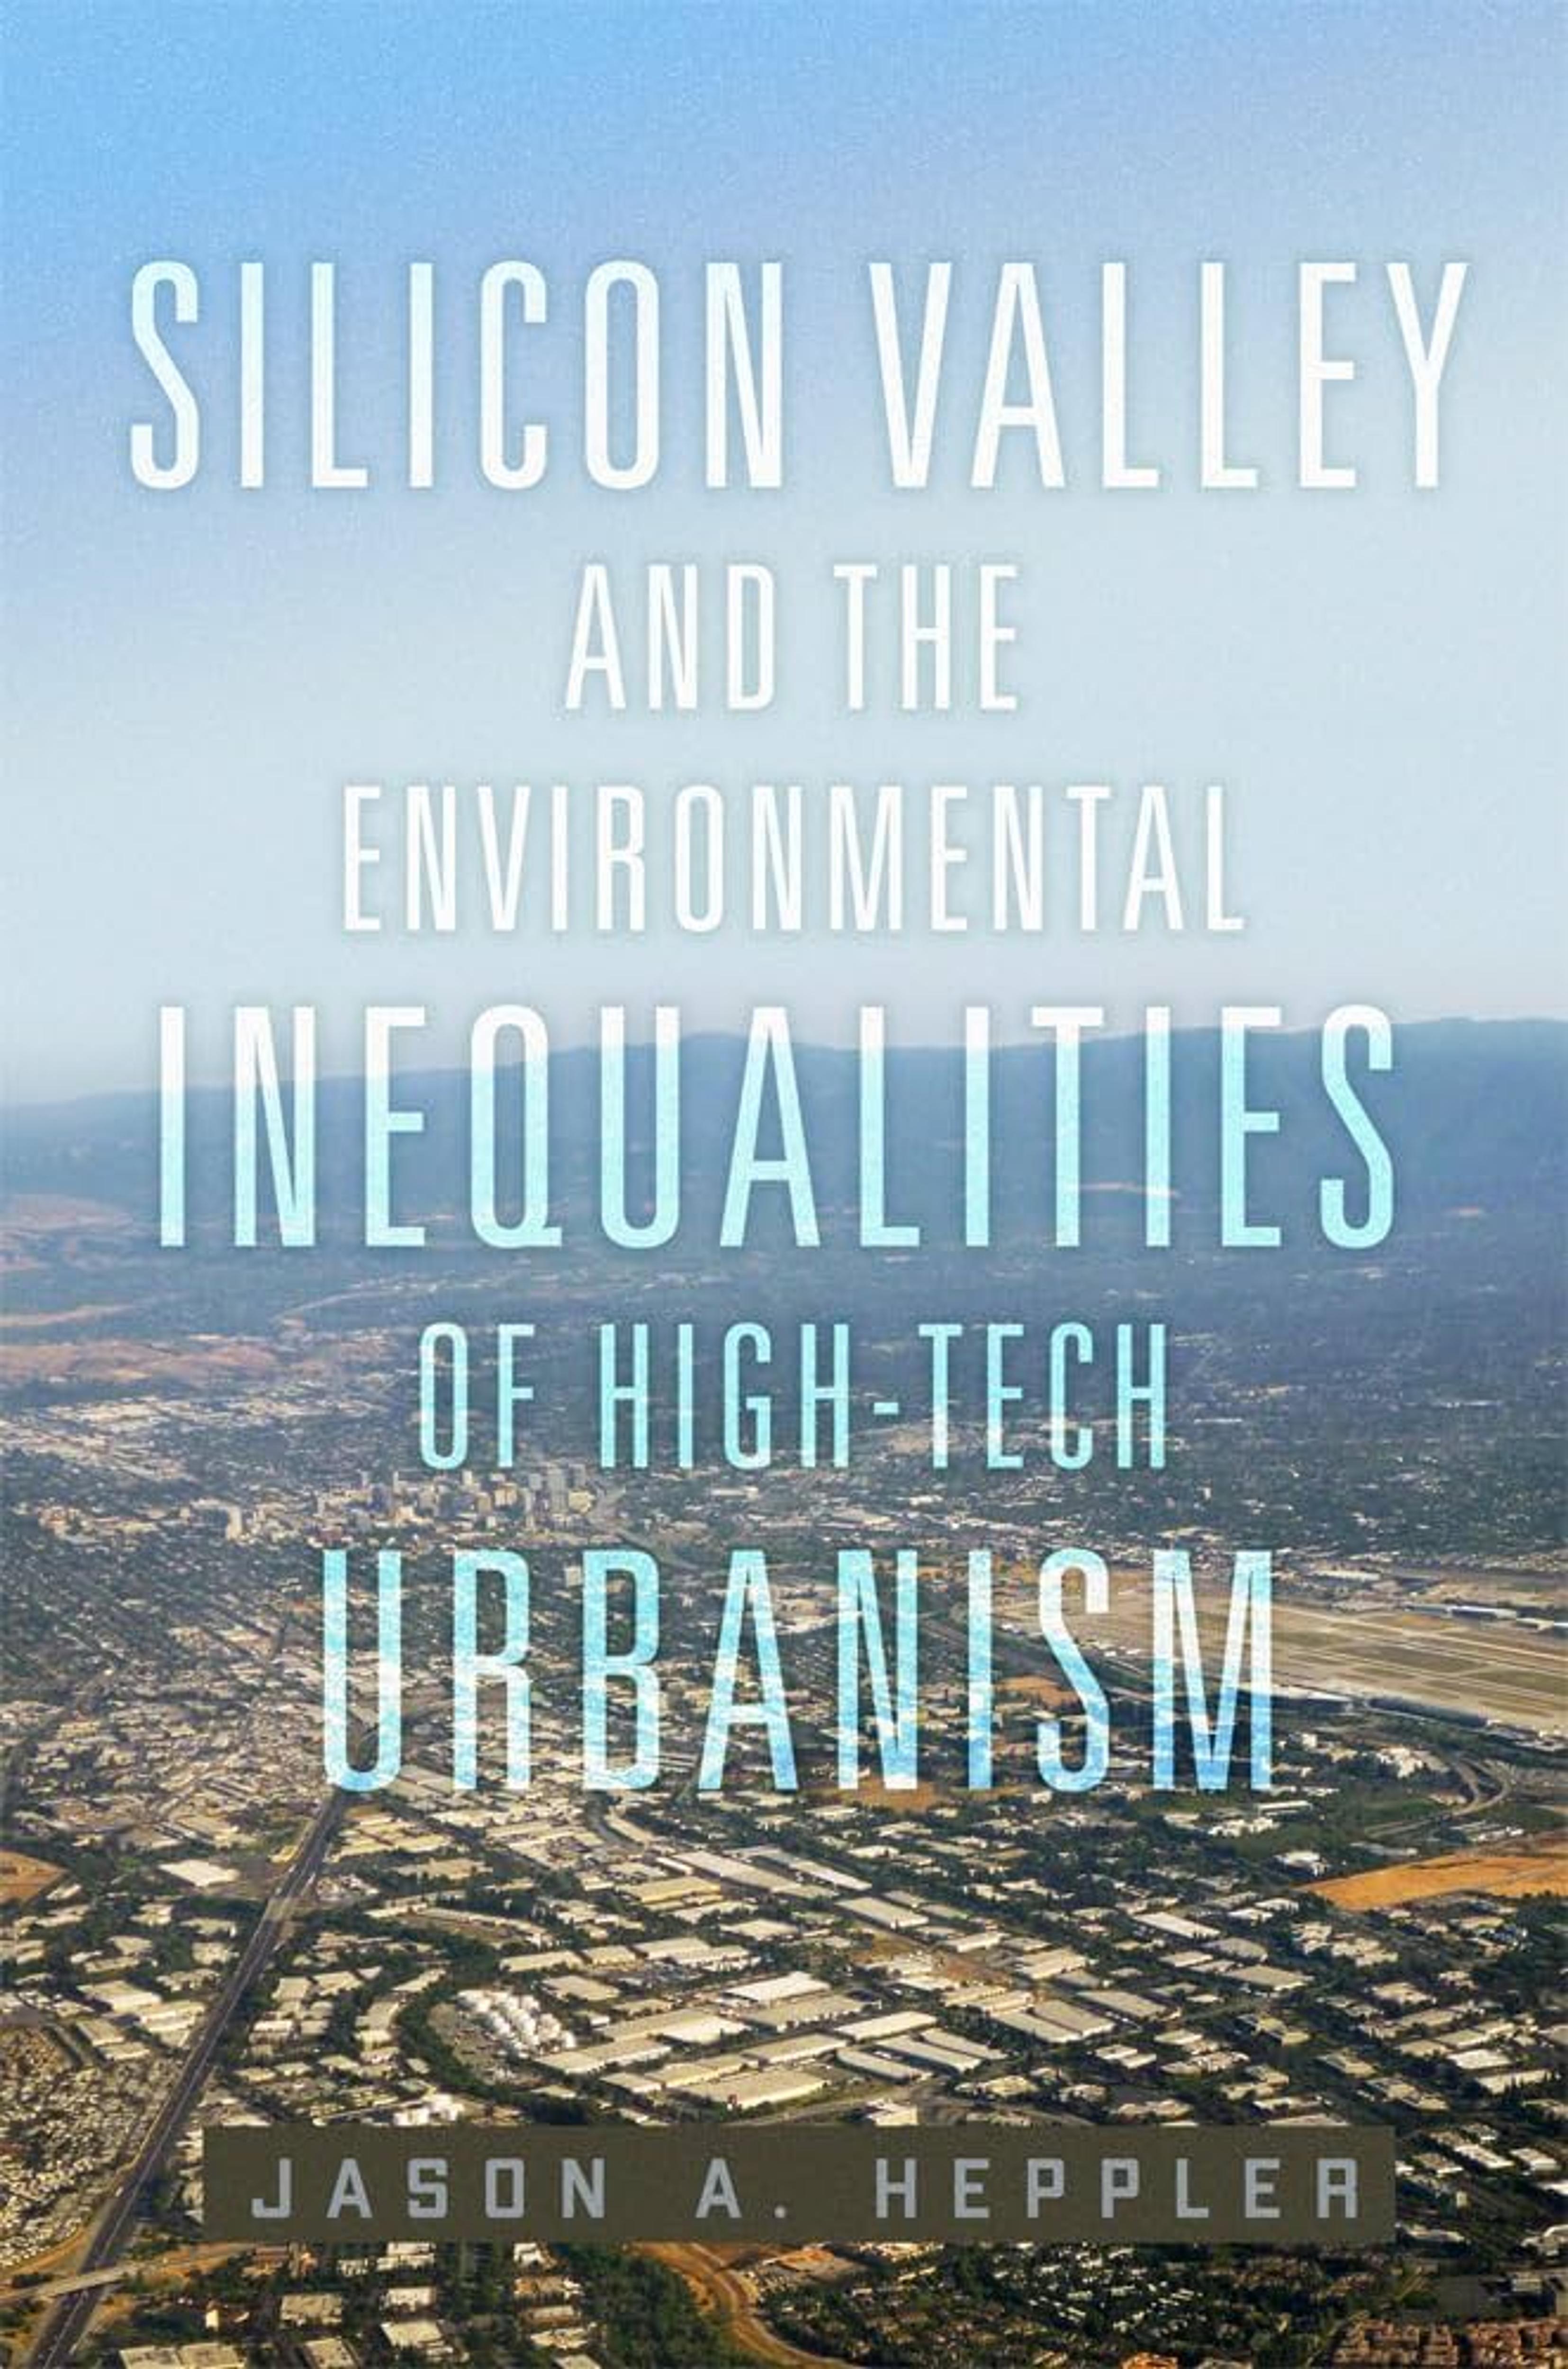 Dirty Digits and “Pleasant Landscapes”: On Jason A. Heppler’s “Silicon Valley and the Environmental Inequalities of High-Tech Urbanism”